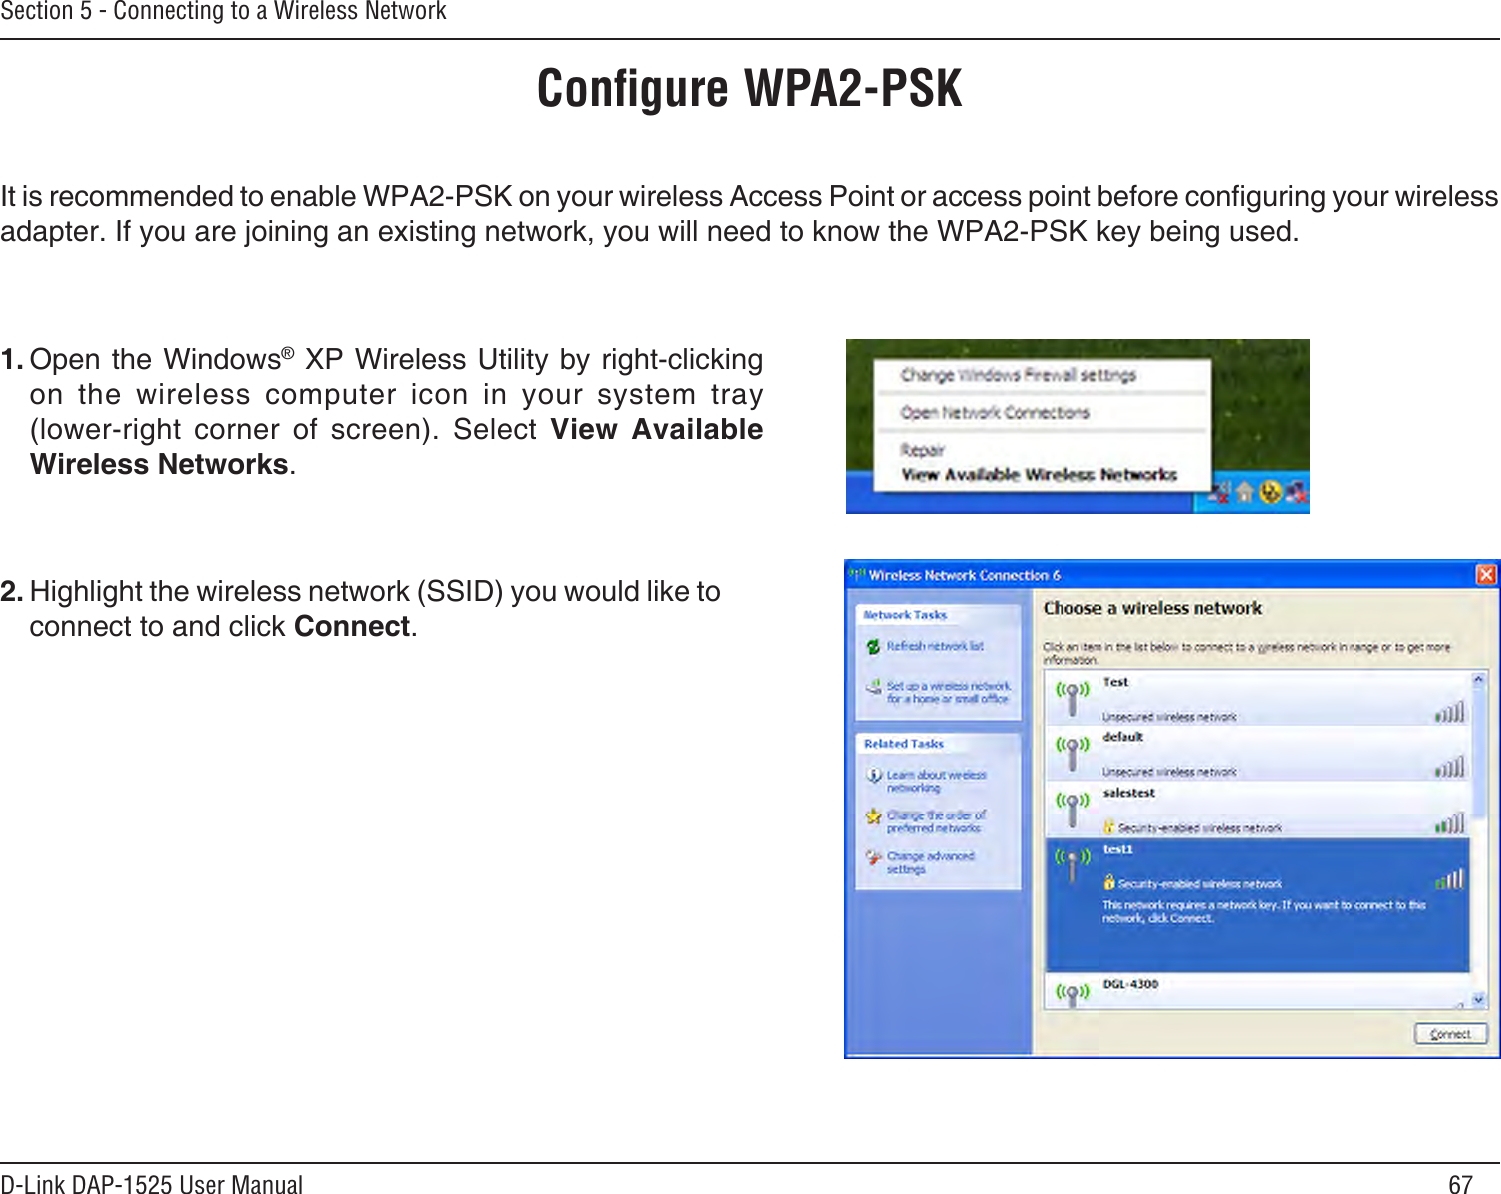 67D-Link DAP-1525 User ManualSection 5 - Connecting to a Wireless NetworkConﬁgure WPA2-PSKIt is recommended to enable WPA2-PSK on your wireless Access Point or access point before conguring your wireless adapter. If you are joining an existing network, you will need to know the WPA2-PSK key being used.2. Highlight the wireless network (SSID) you would like to connect to and click Connect.1. Open the Windows® XP Wireless Utility by right-clicking on  the  wireless  computer  icon  in  your  system  tray  (lower-right  corner  of  screen).  Select  View  Available Wireless Networks. 